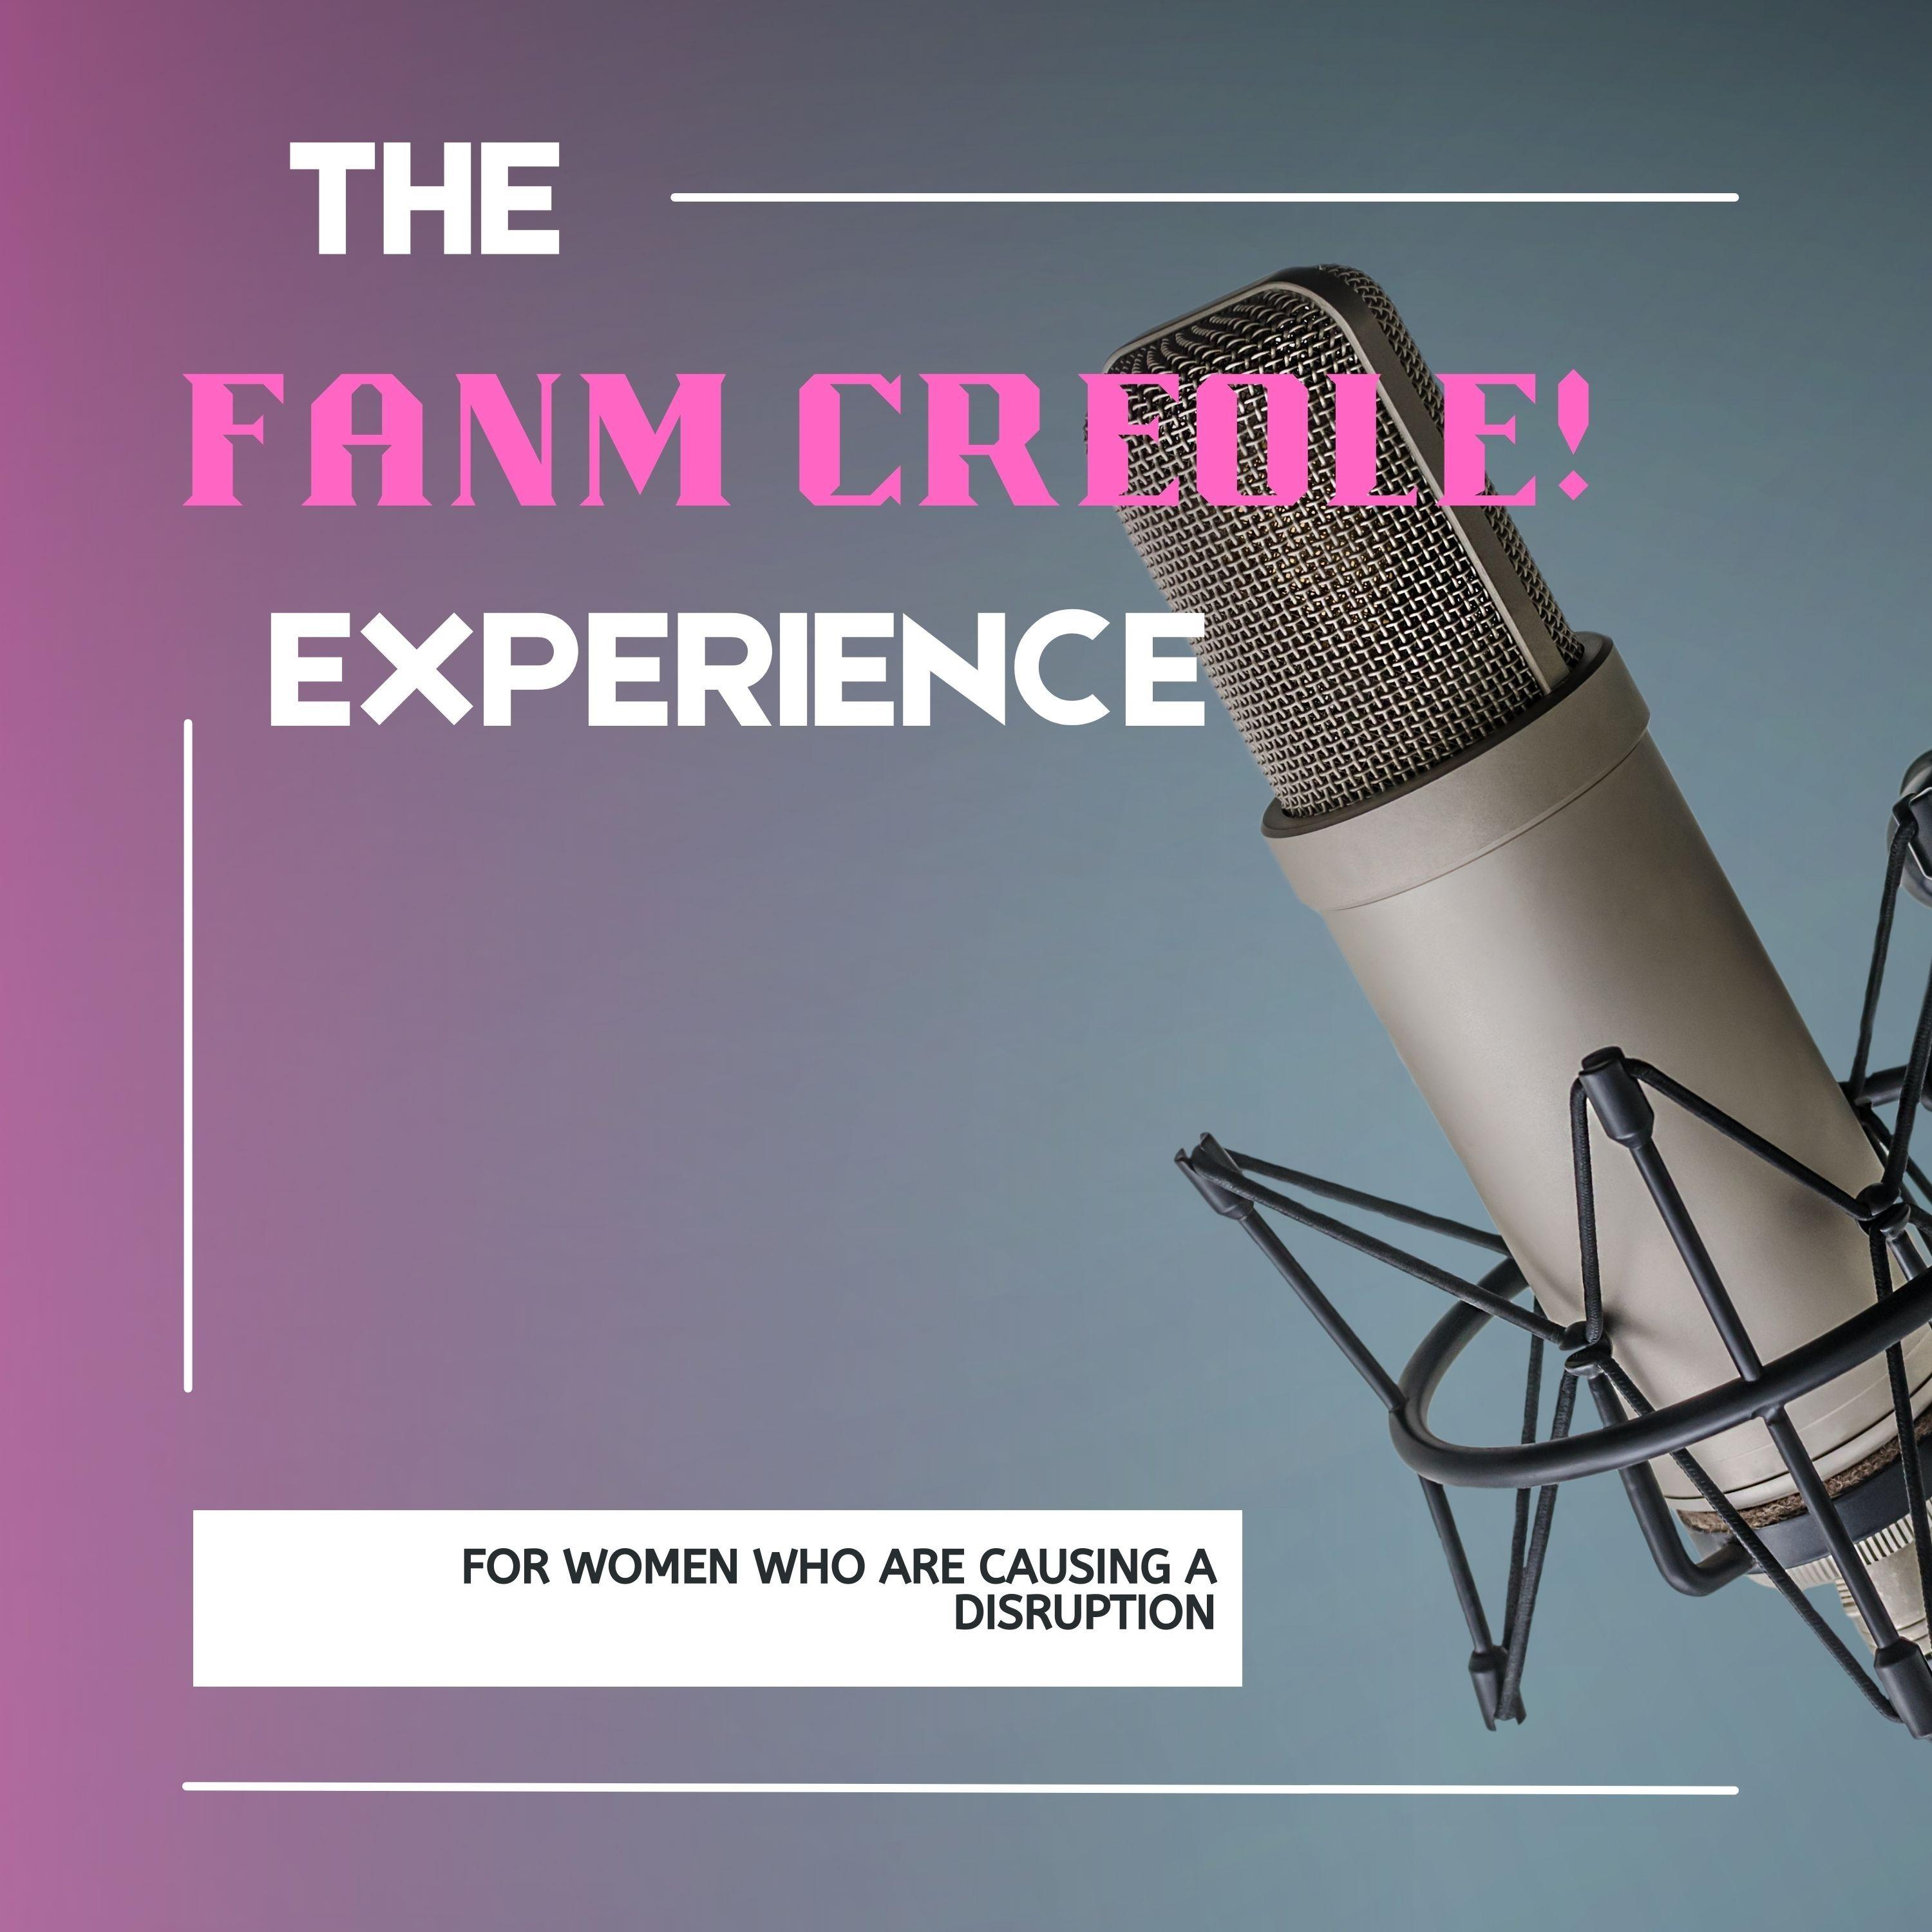 The Fanm Creole! Experience